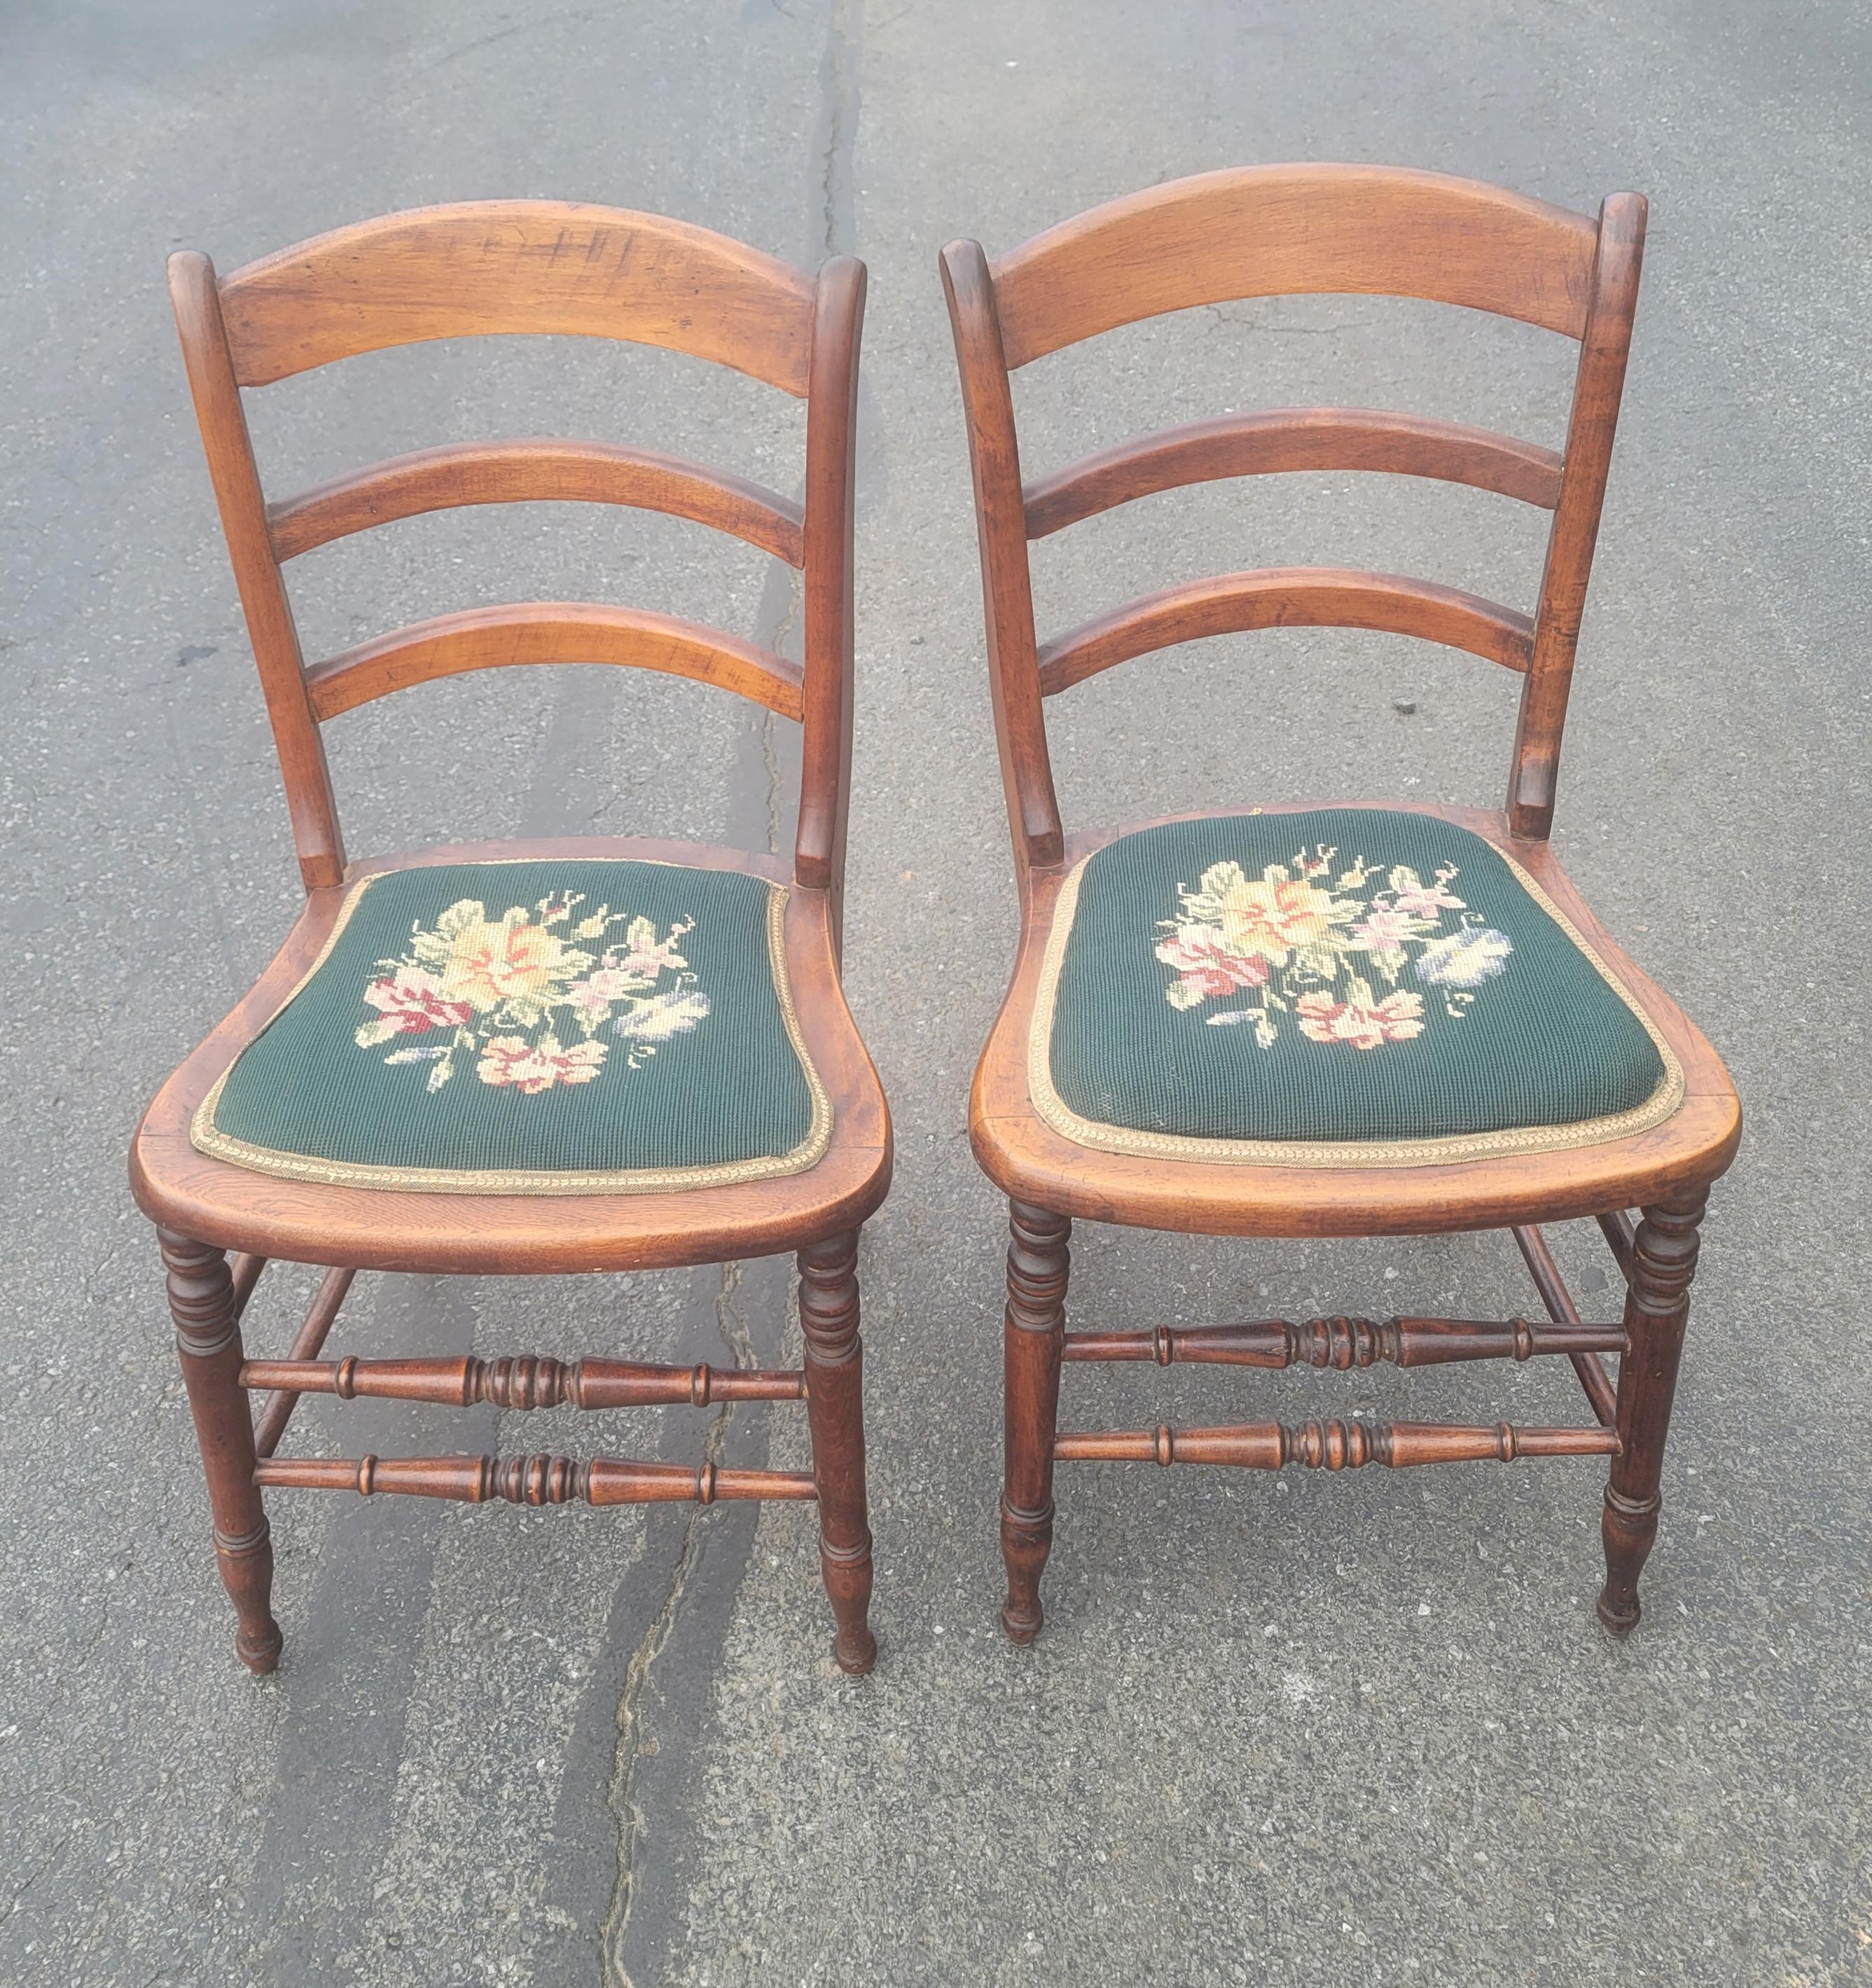 Early 20th Century Victorian Ladder Back Walnut and Needlepoint Seat Side Chairs For Sale 2